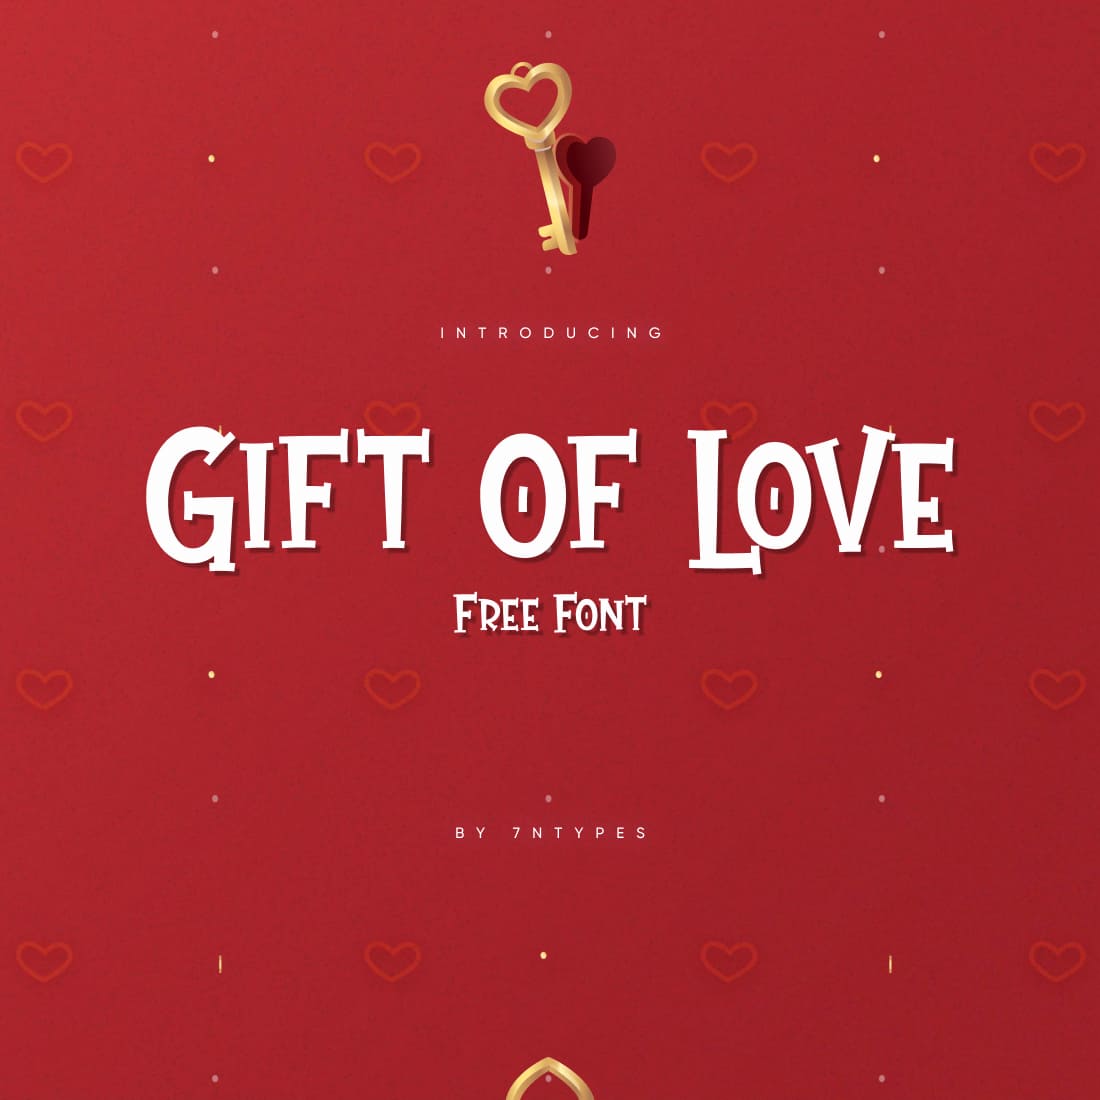 Gift Of Love Free Font Main MasterBundles Red Cover.